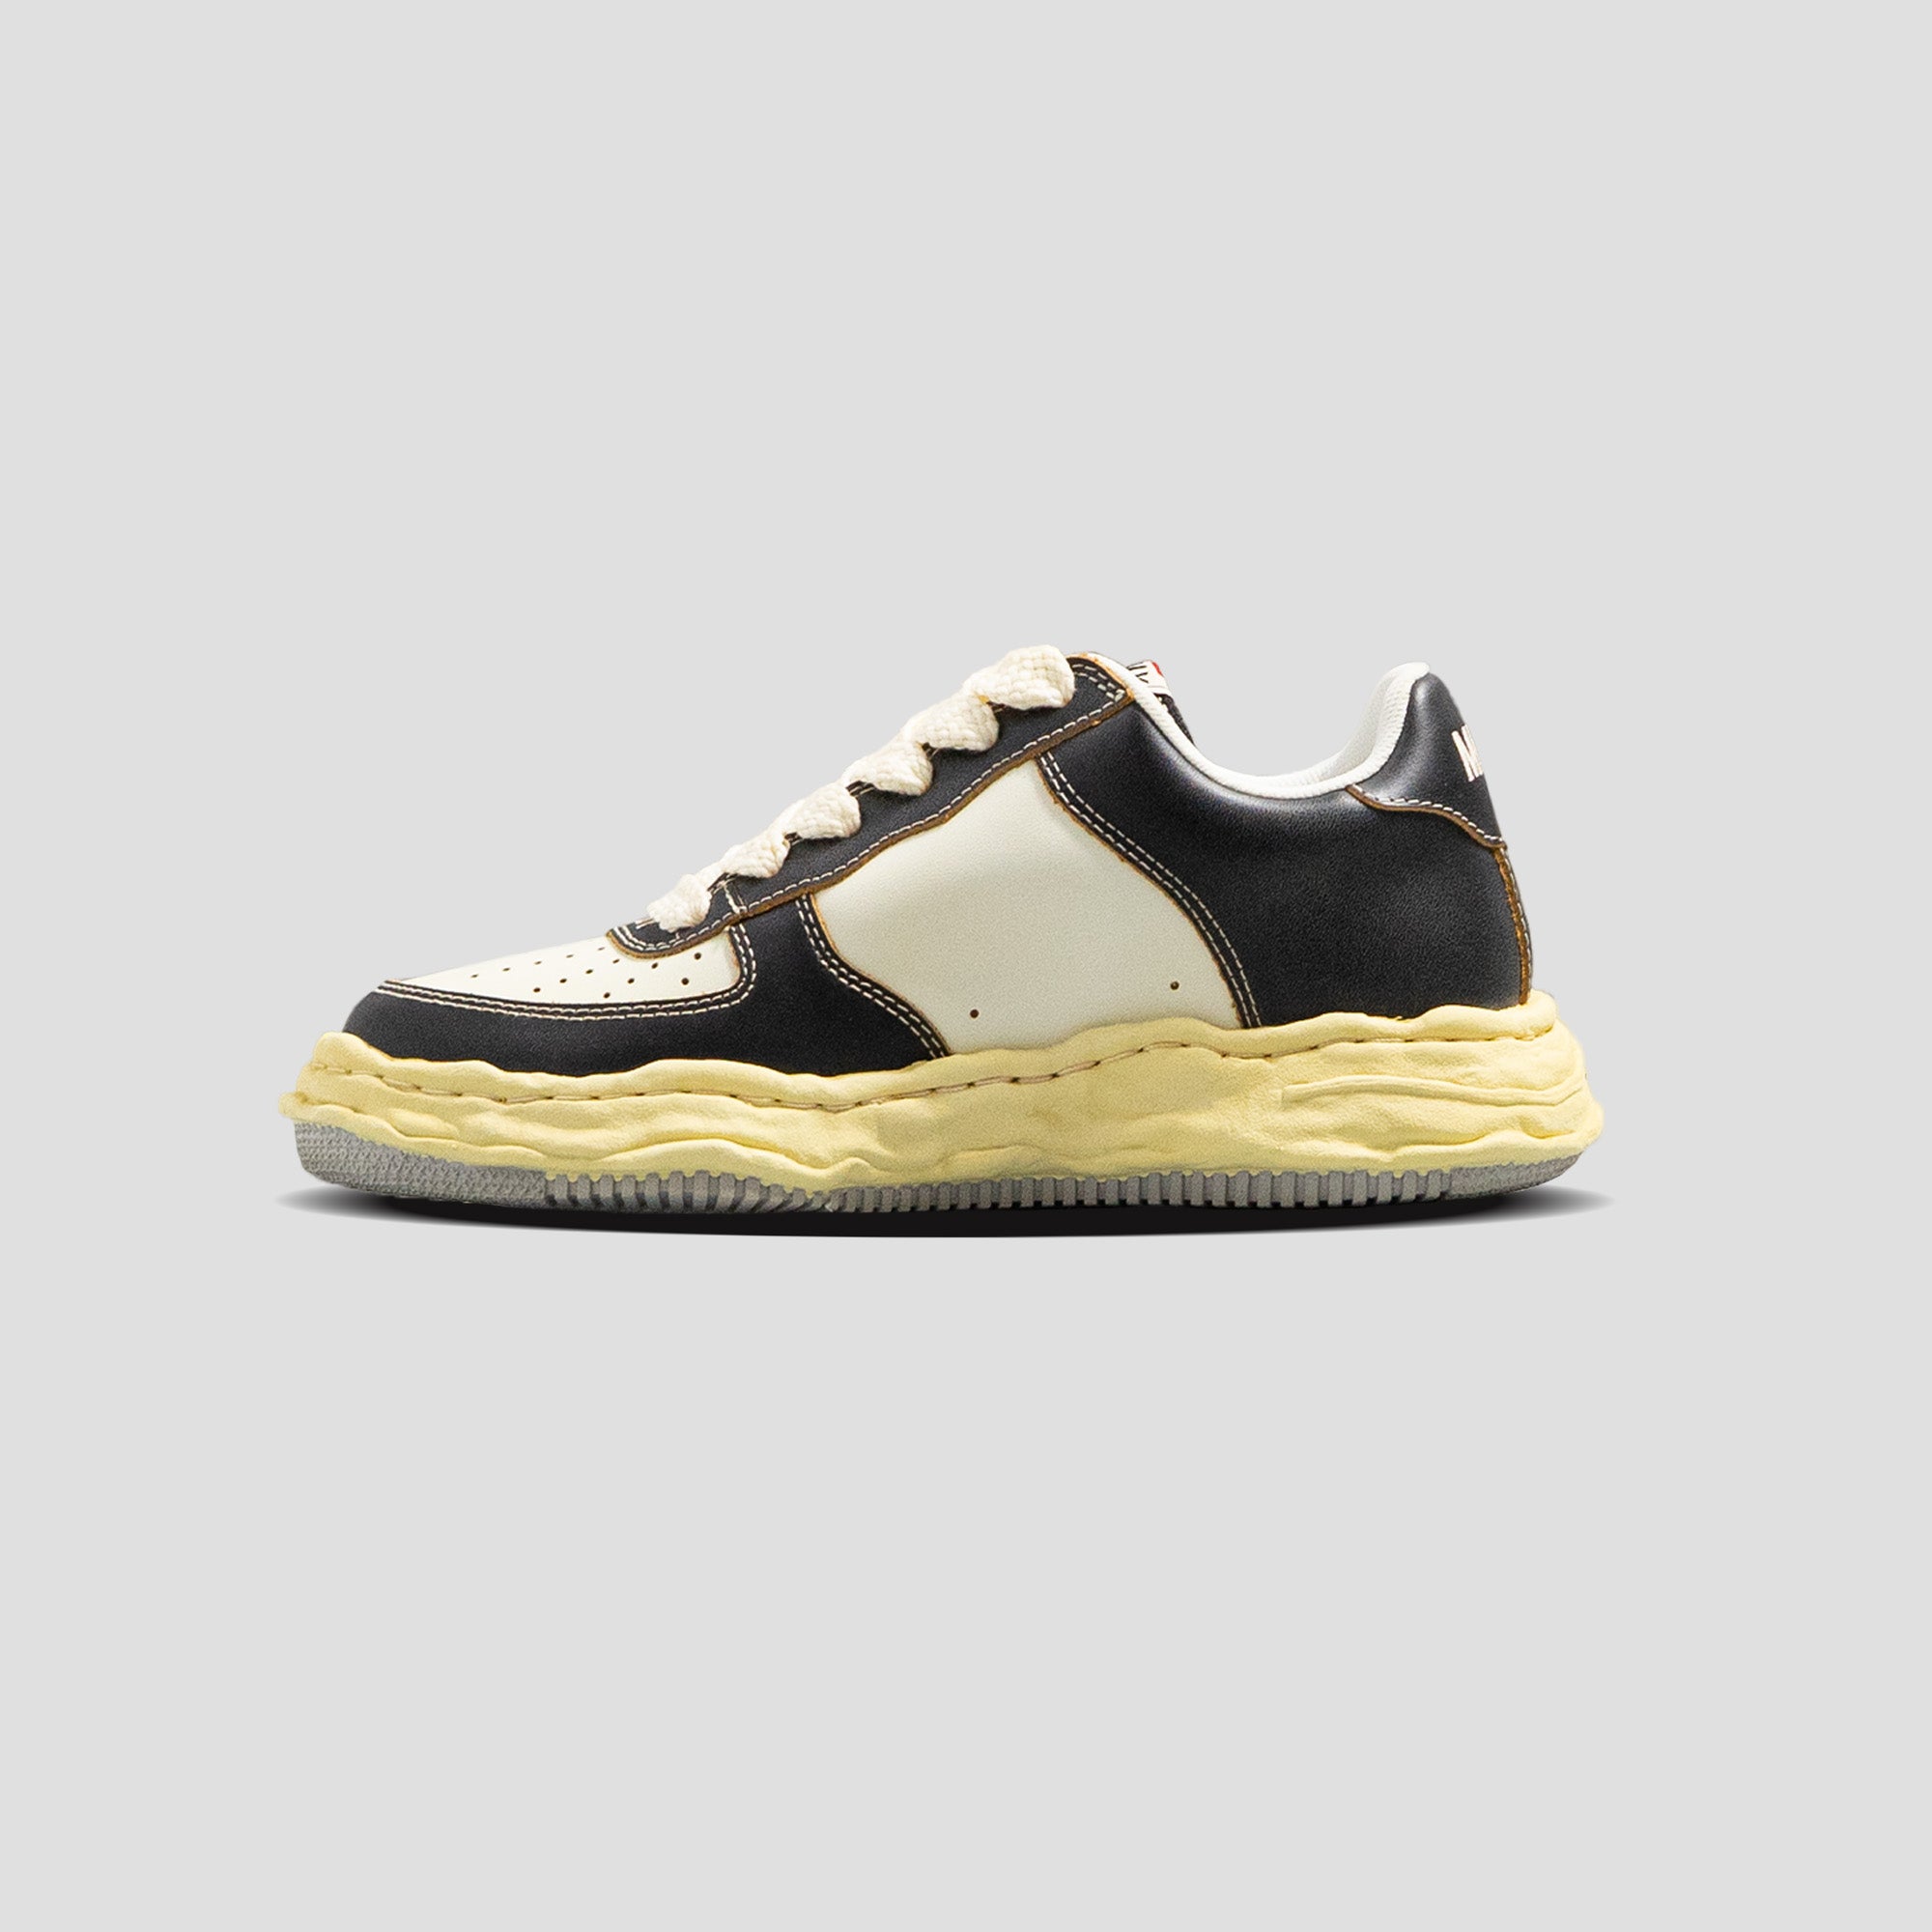 WAYNE OG SOLE LOW-TOP VINTAGE TREATMENT LEATHER SNEAKERS